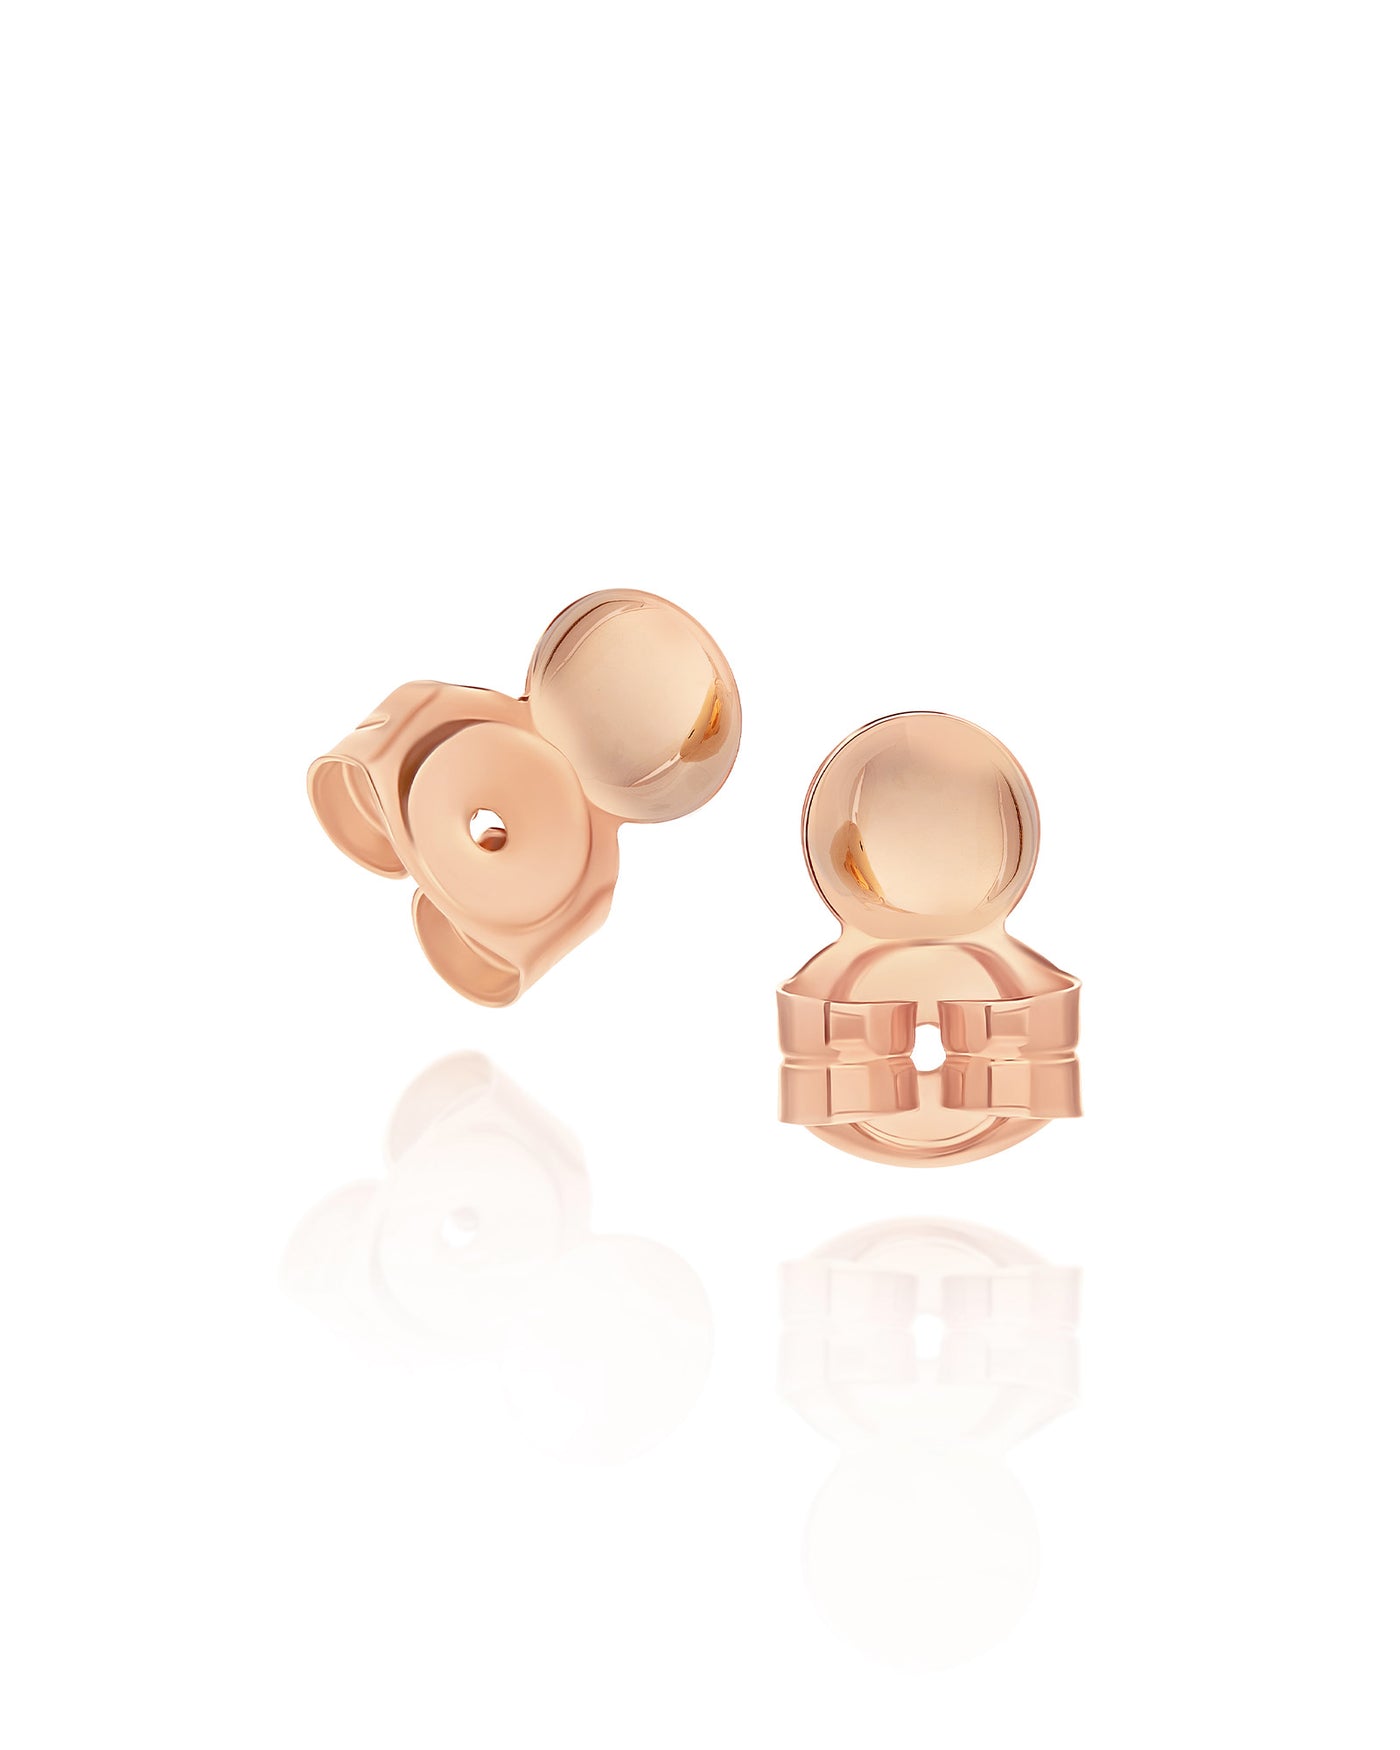 "Candle" rose gold and diamonds earrings